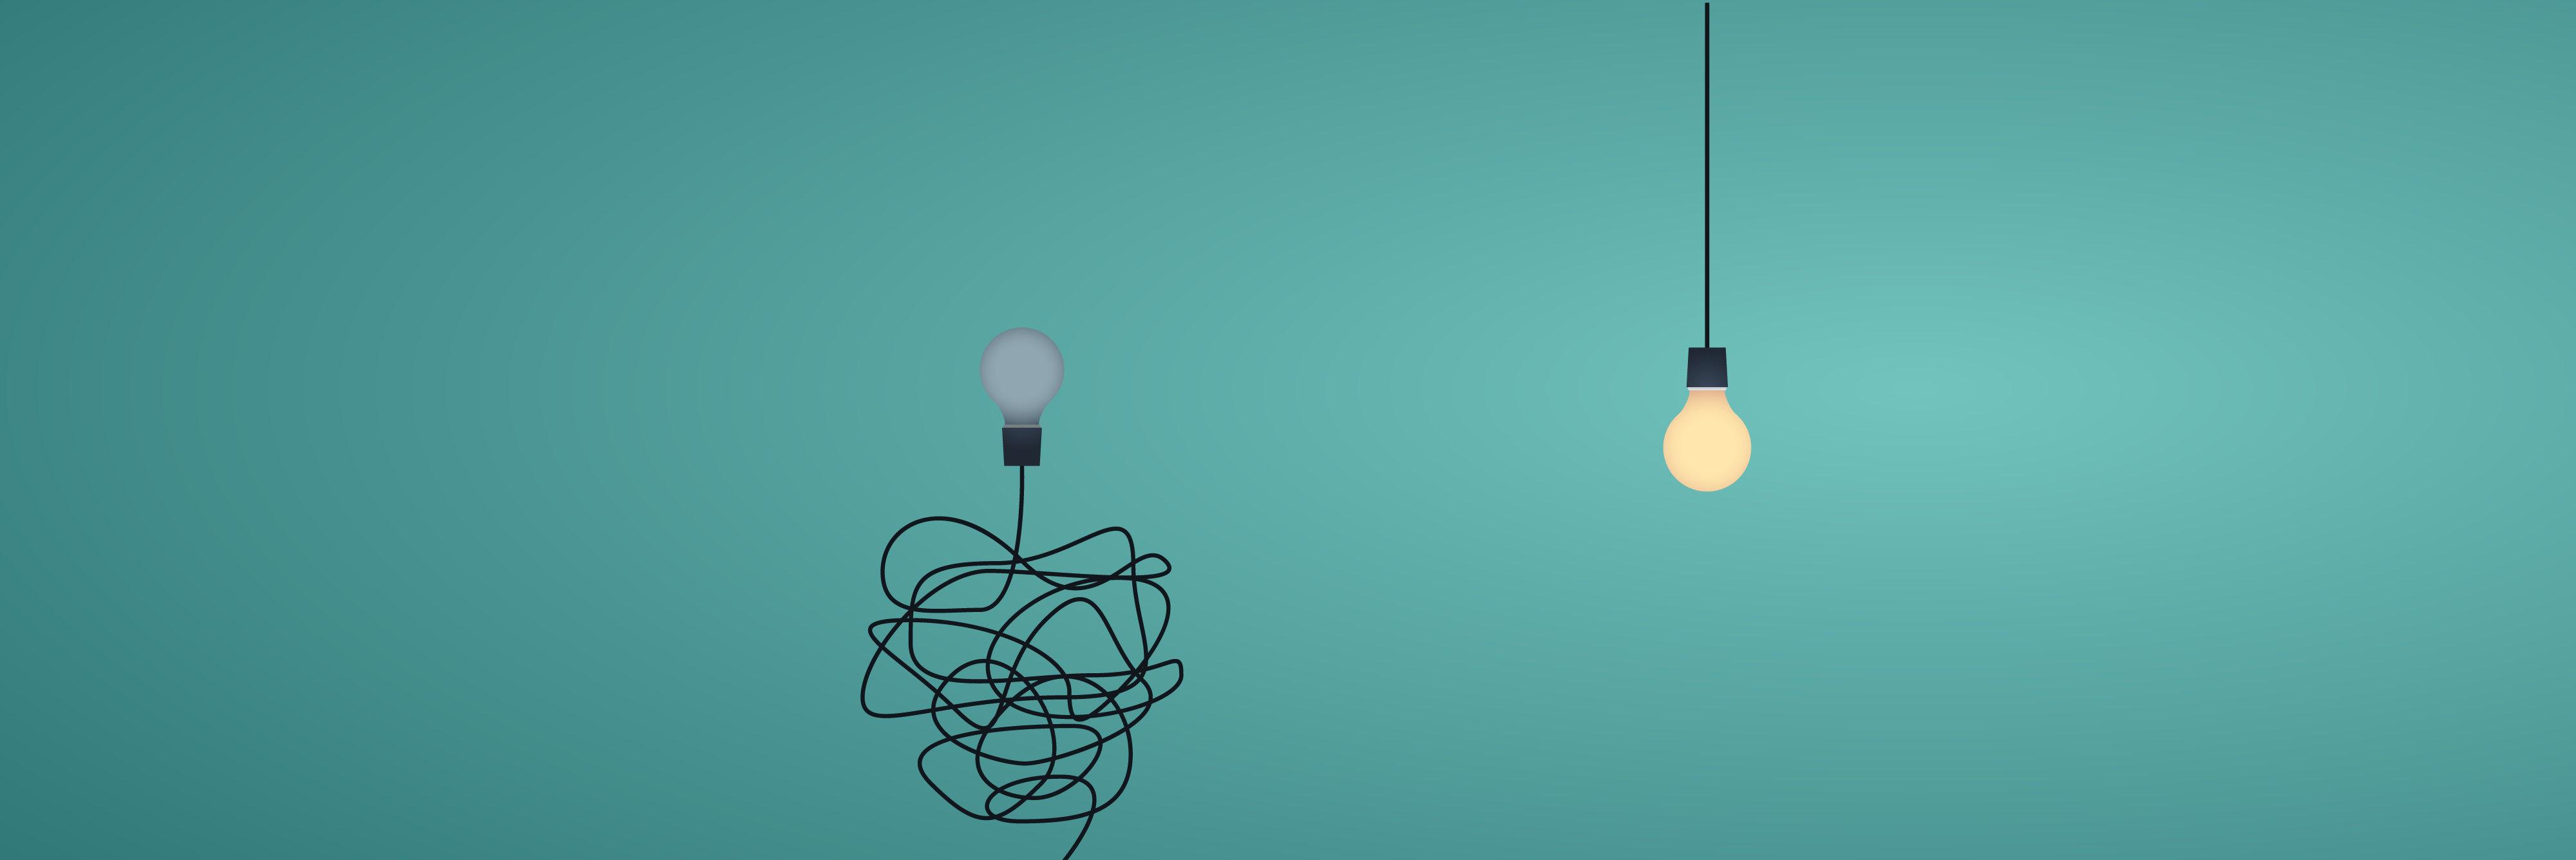 Light bulb with straight cord and lightbulb with tangled cord